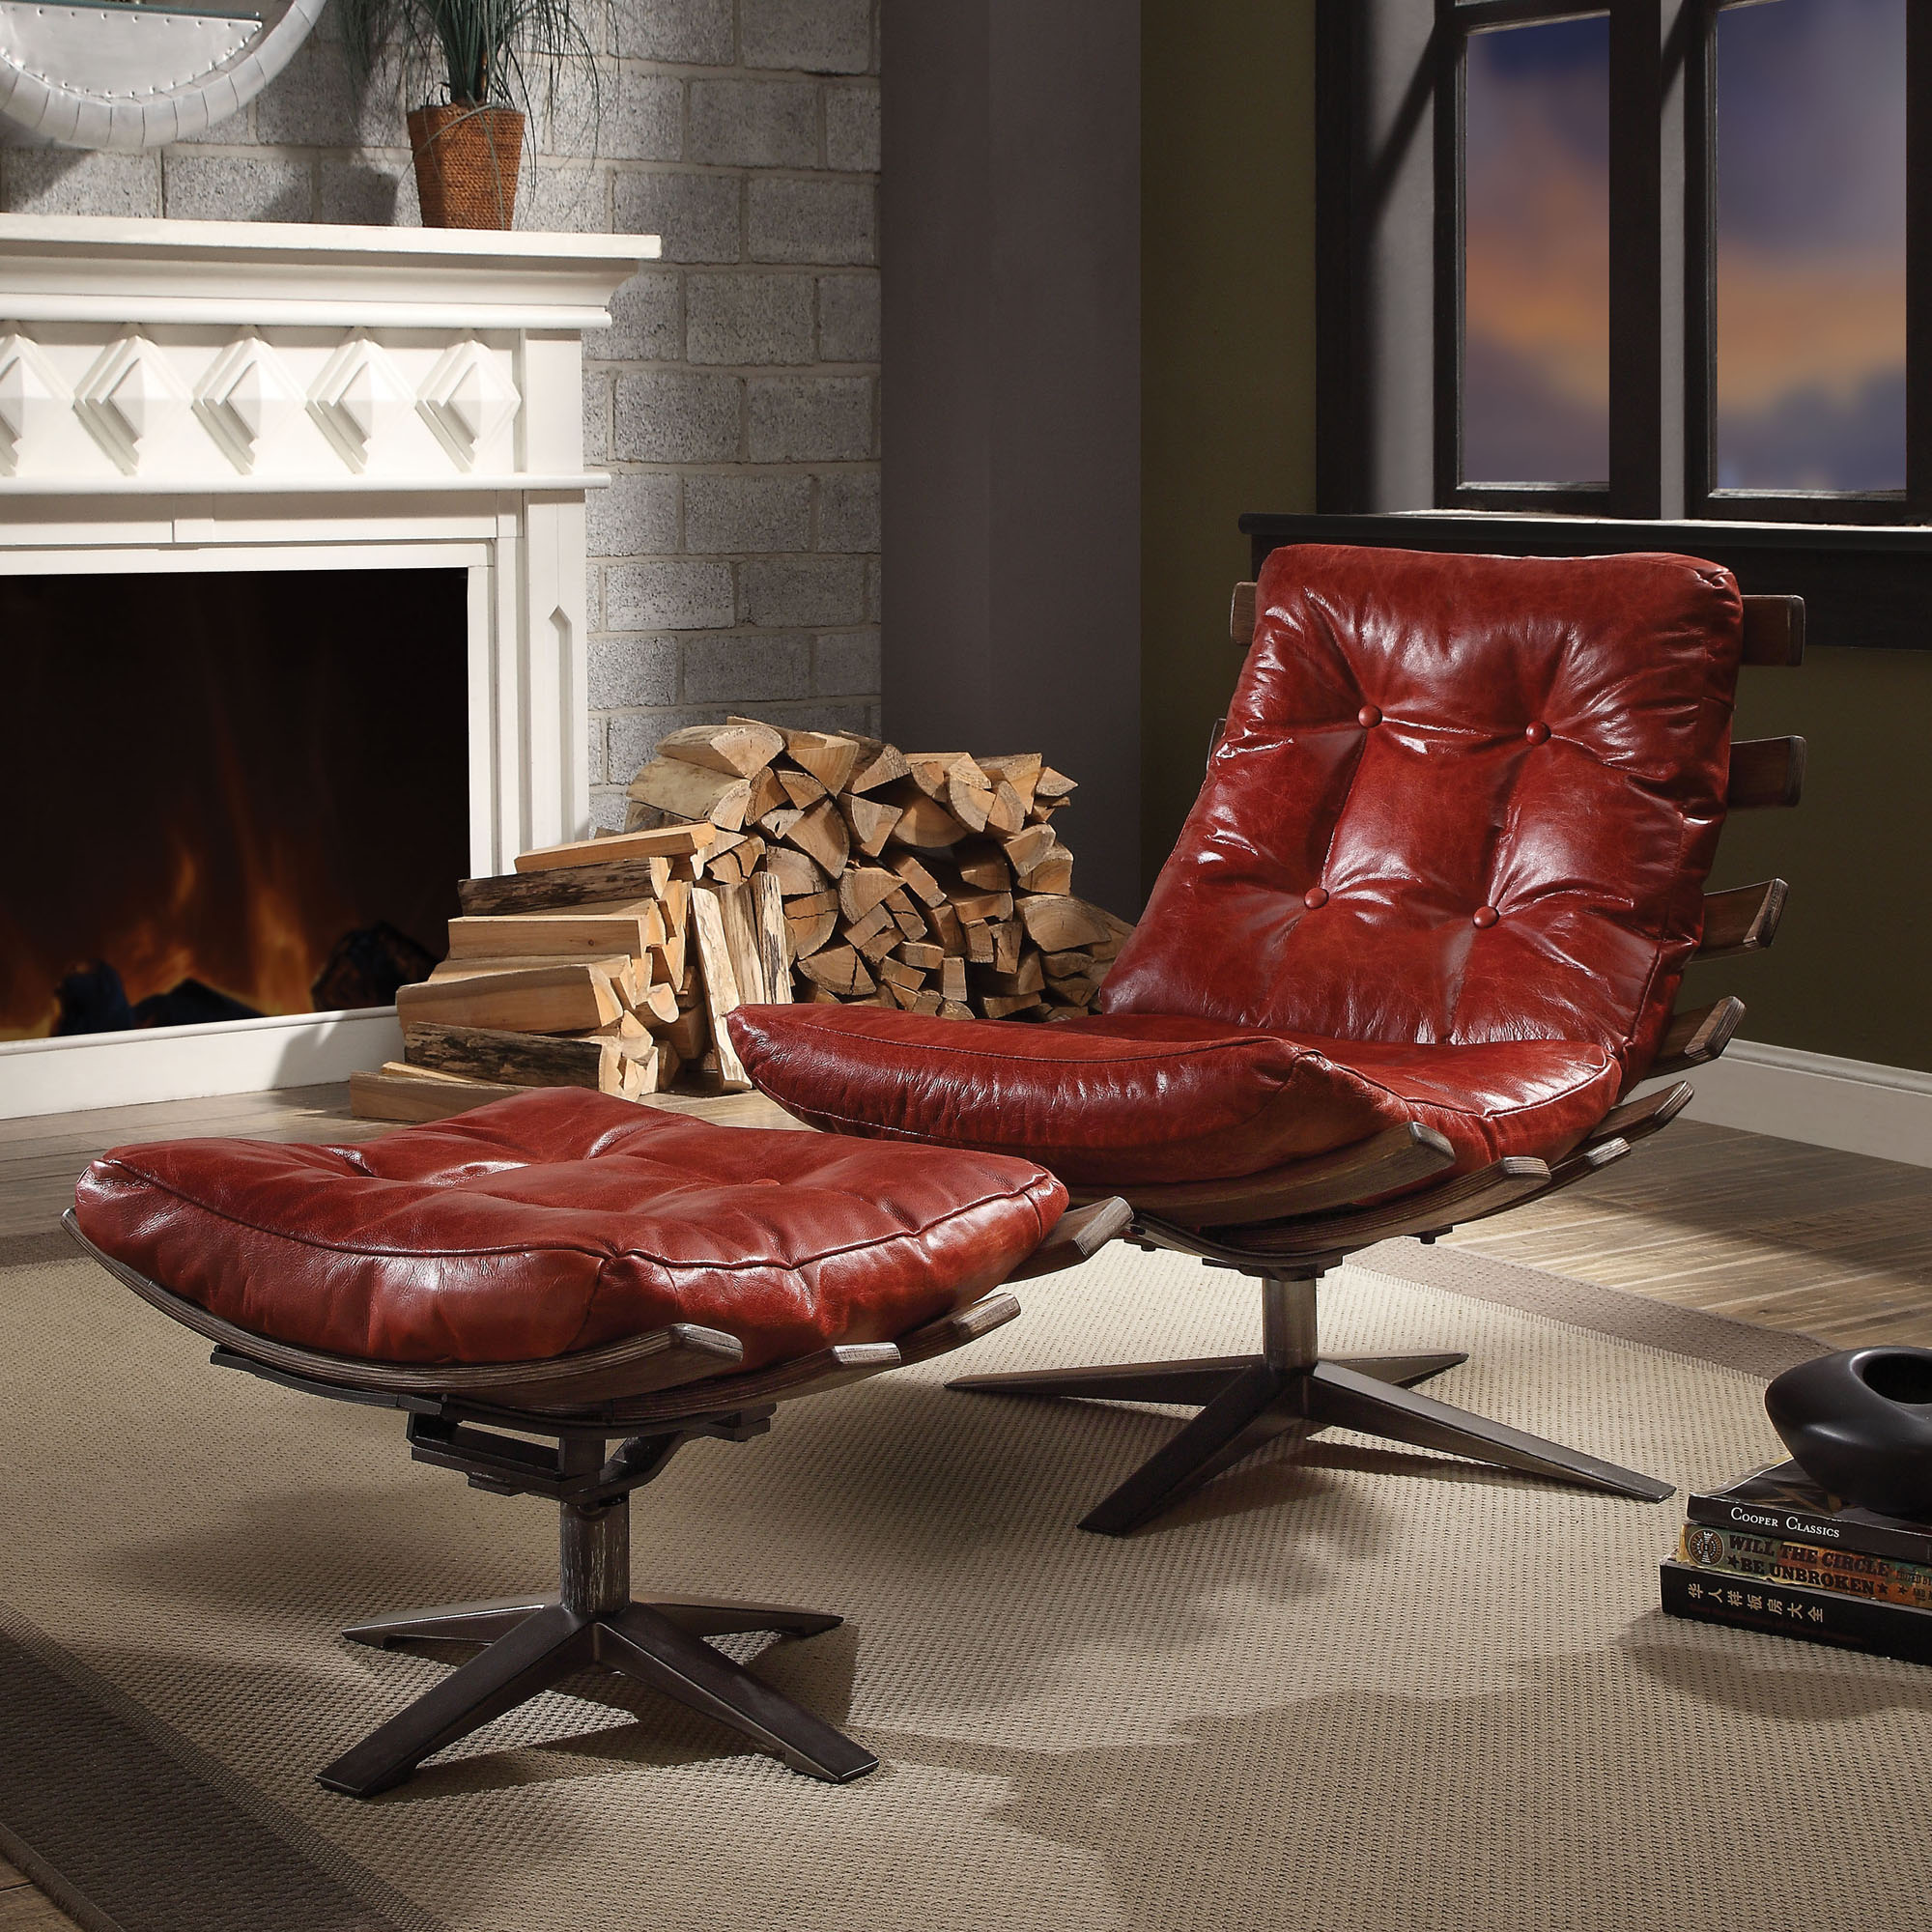 ACME Gandy 2-piece Chair and Ottoman Set in Antique Red and Brown - image 5 of 8